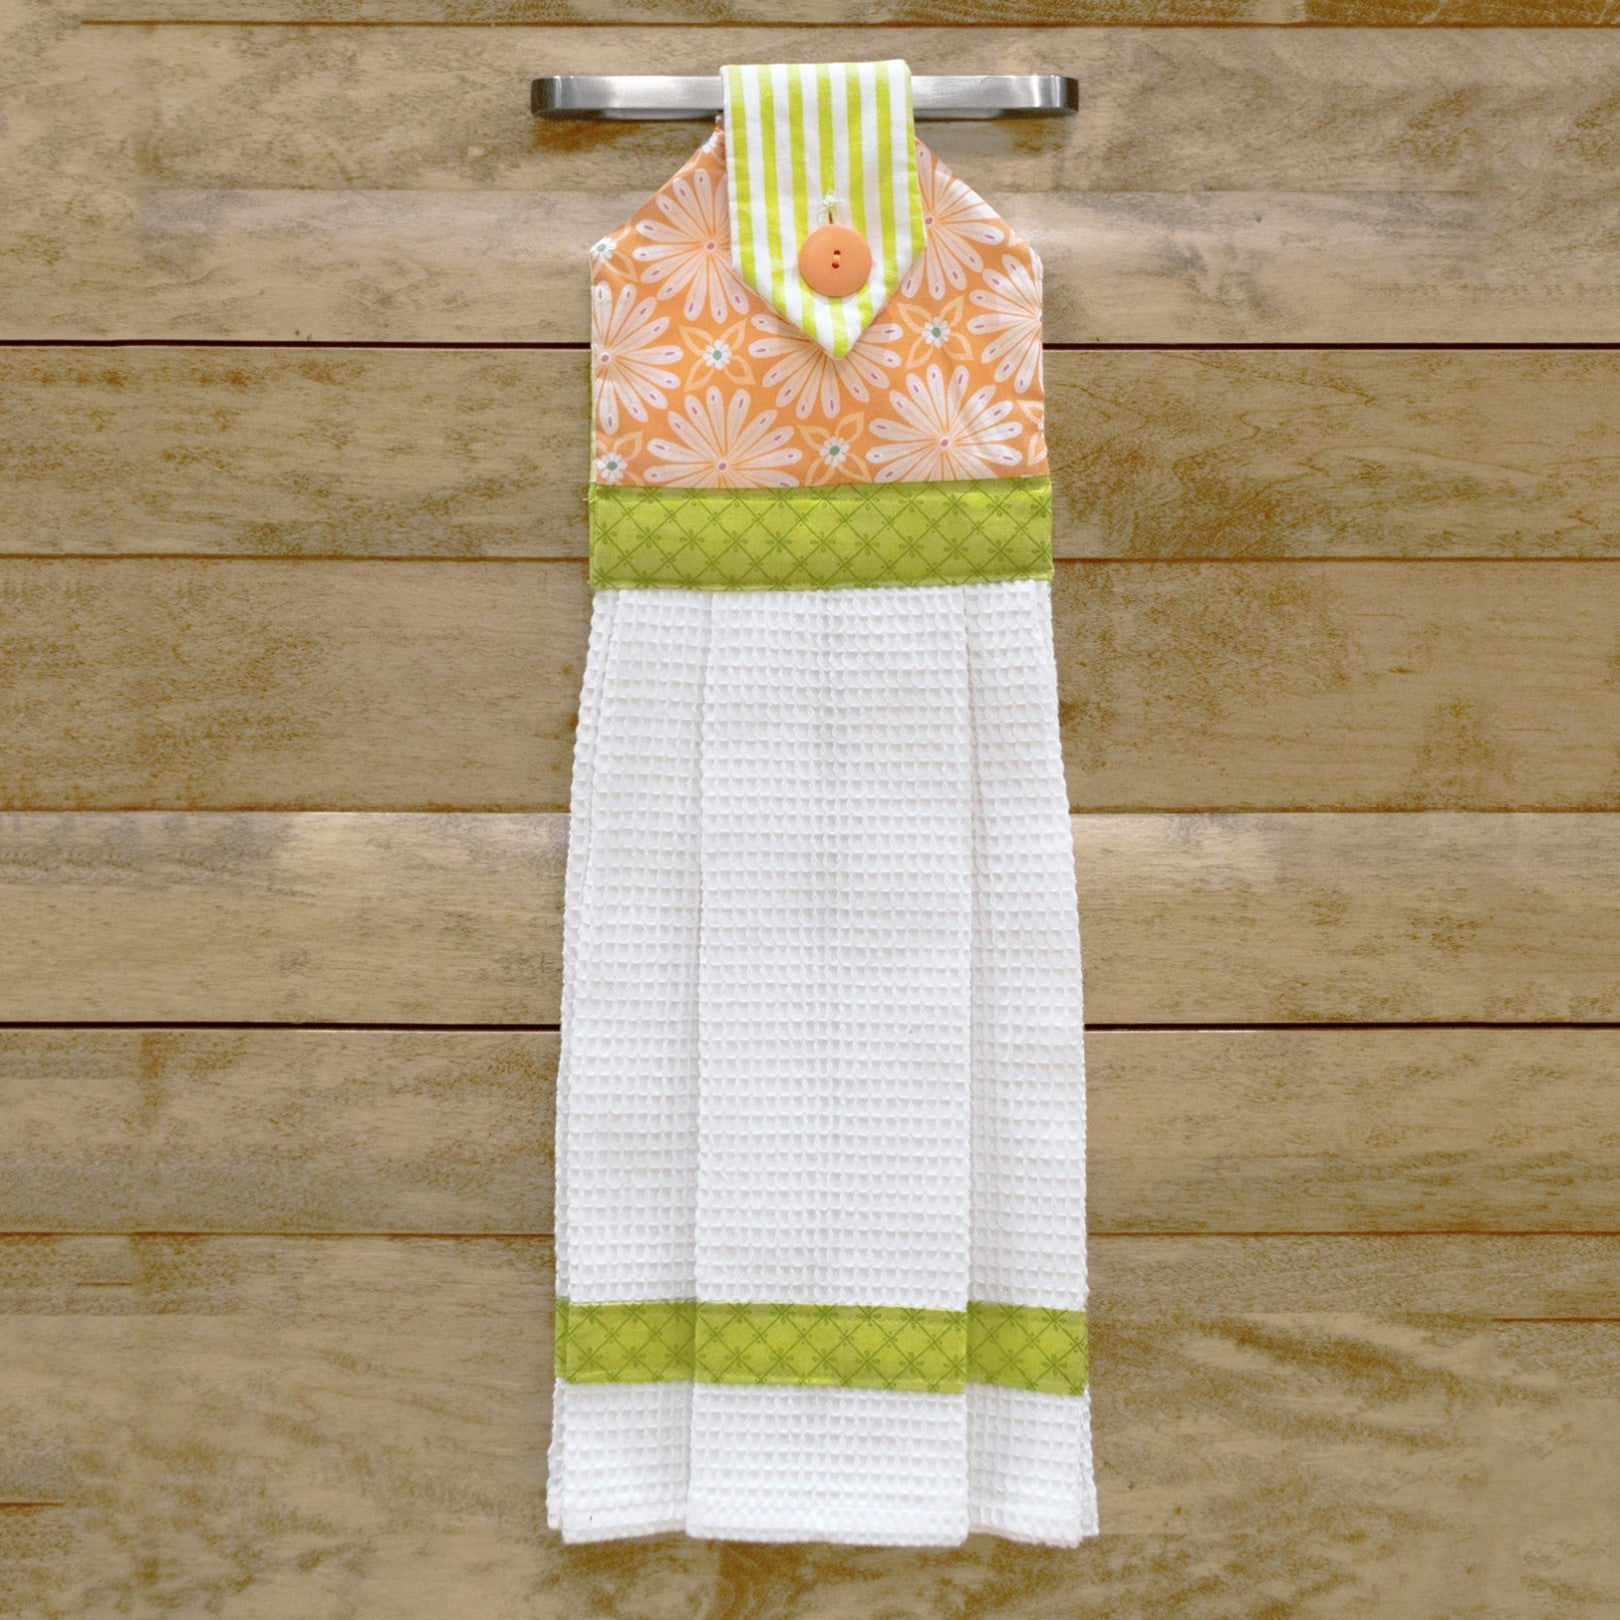 Hanging Towel Kit with Patterns by June Taylor